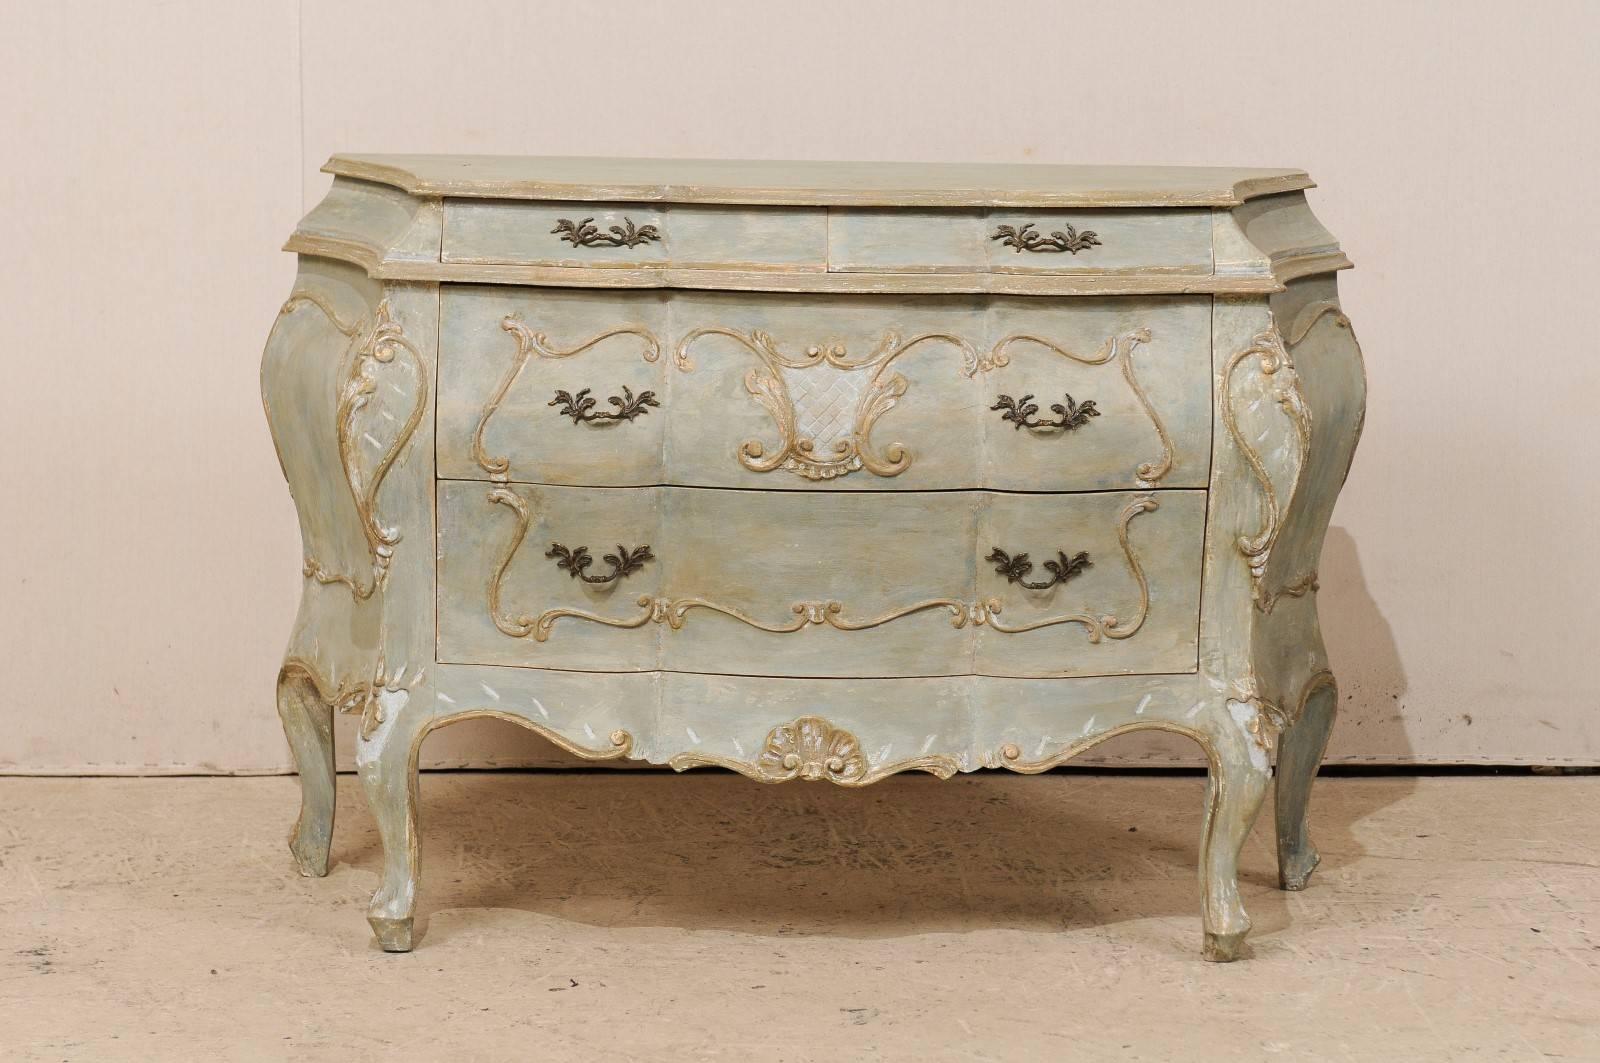 An American vintage four-drawer painted wood Bombé chest. This American Bombé chest from the late 20th century is ornately decorated with a shell carving on the skirt and cartouche outline around the drawers and chest sides. This Bombay style chest